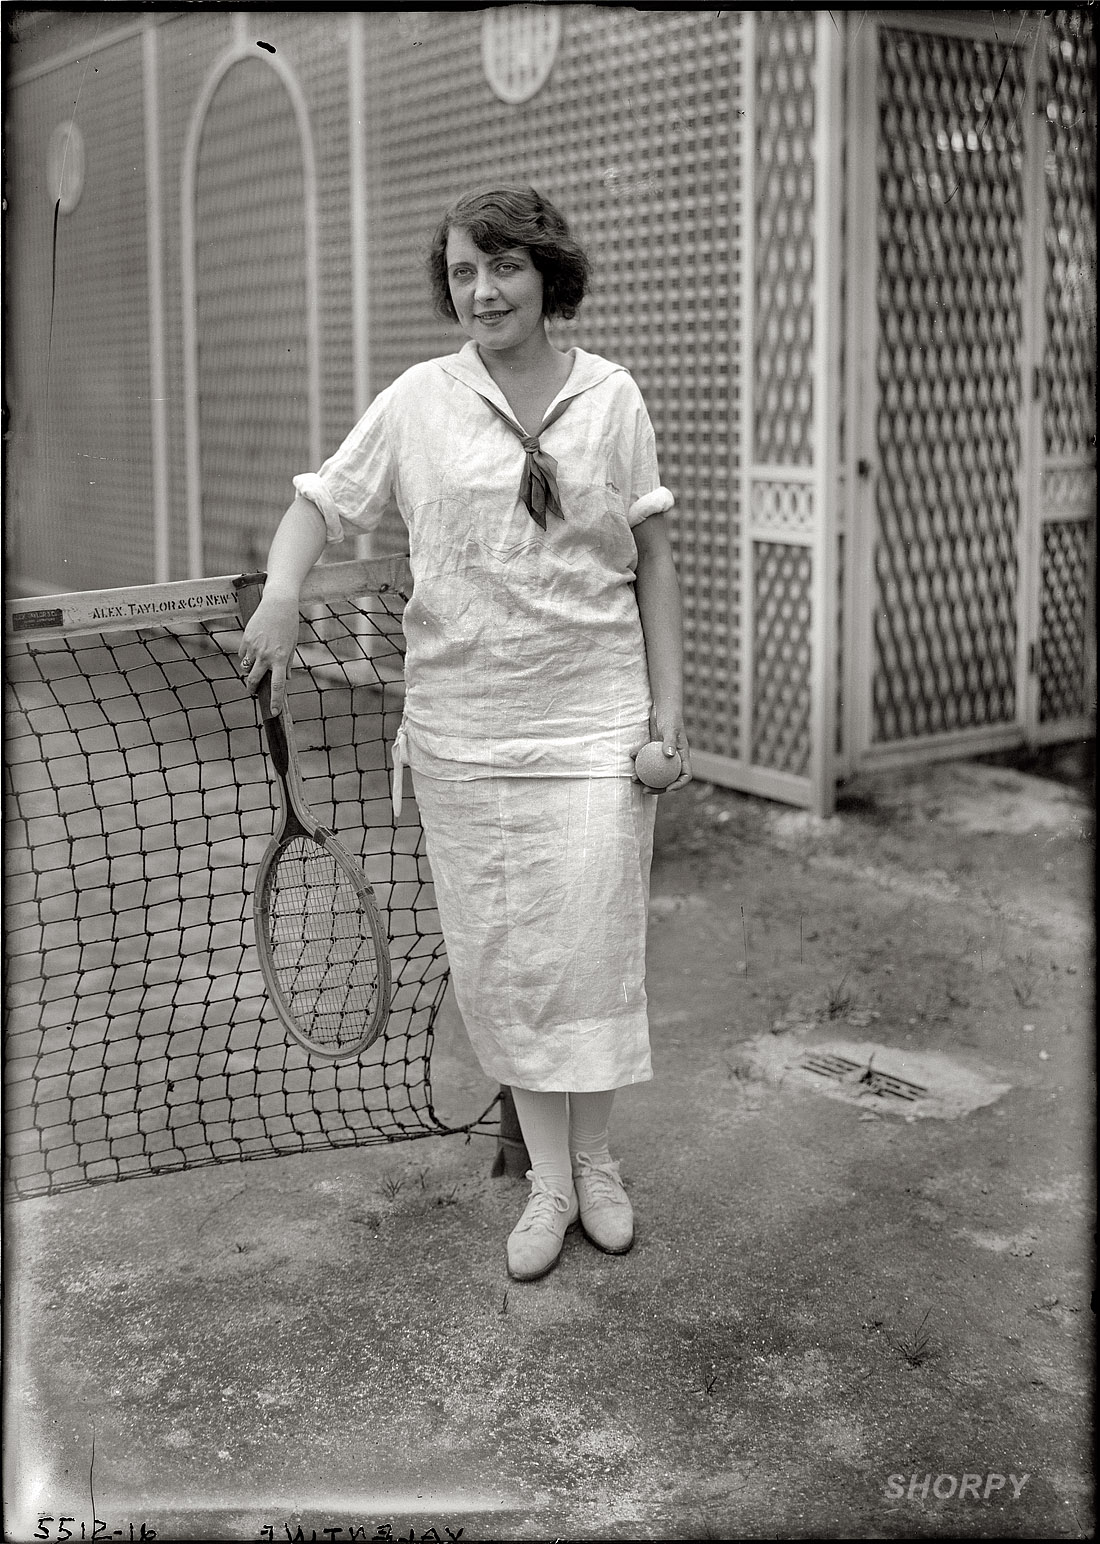 The actress Grace Valentine strikes a sporty pose circa 1920. View full size. 5x7 glass negative, George Grantham Bain Collection, Library of Congress.